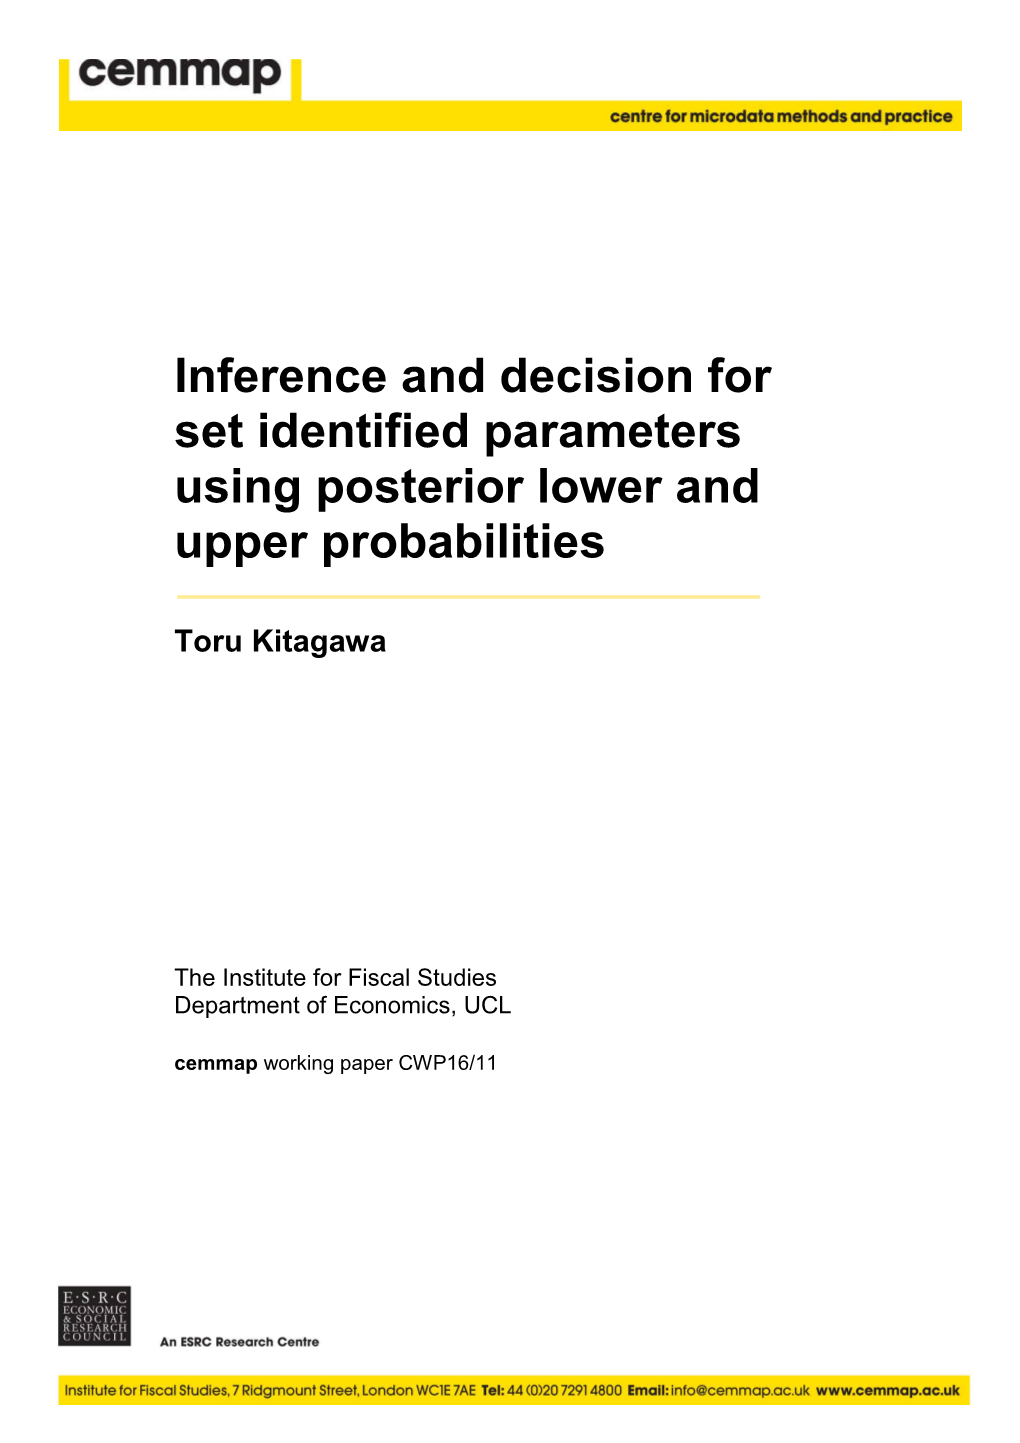 Inference and Decision for Set Identified Parameters Using Posterior Lower and Upper Probabilities